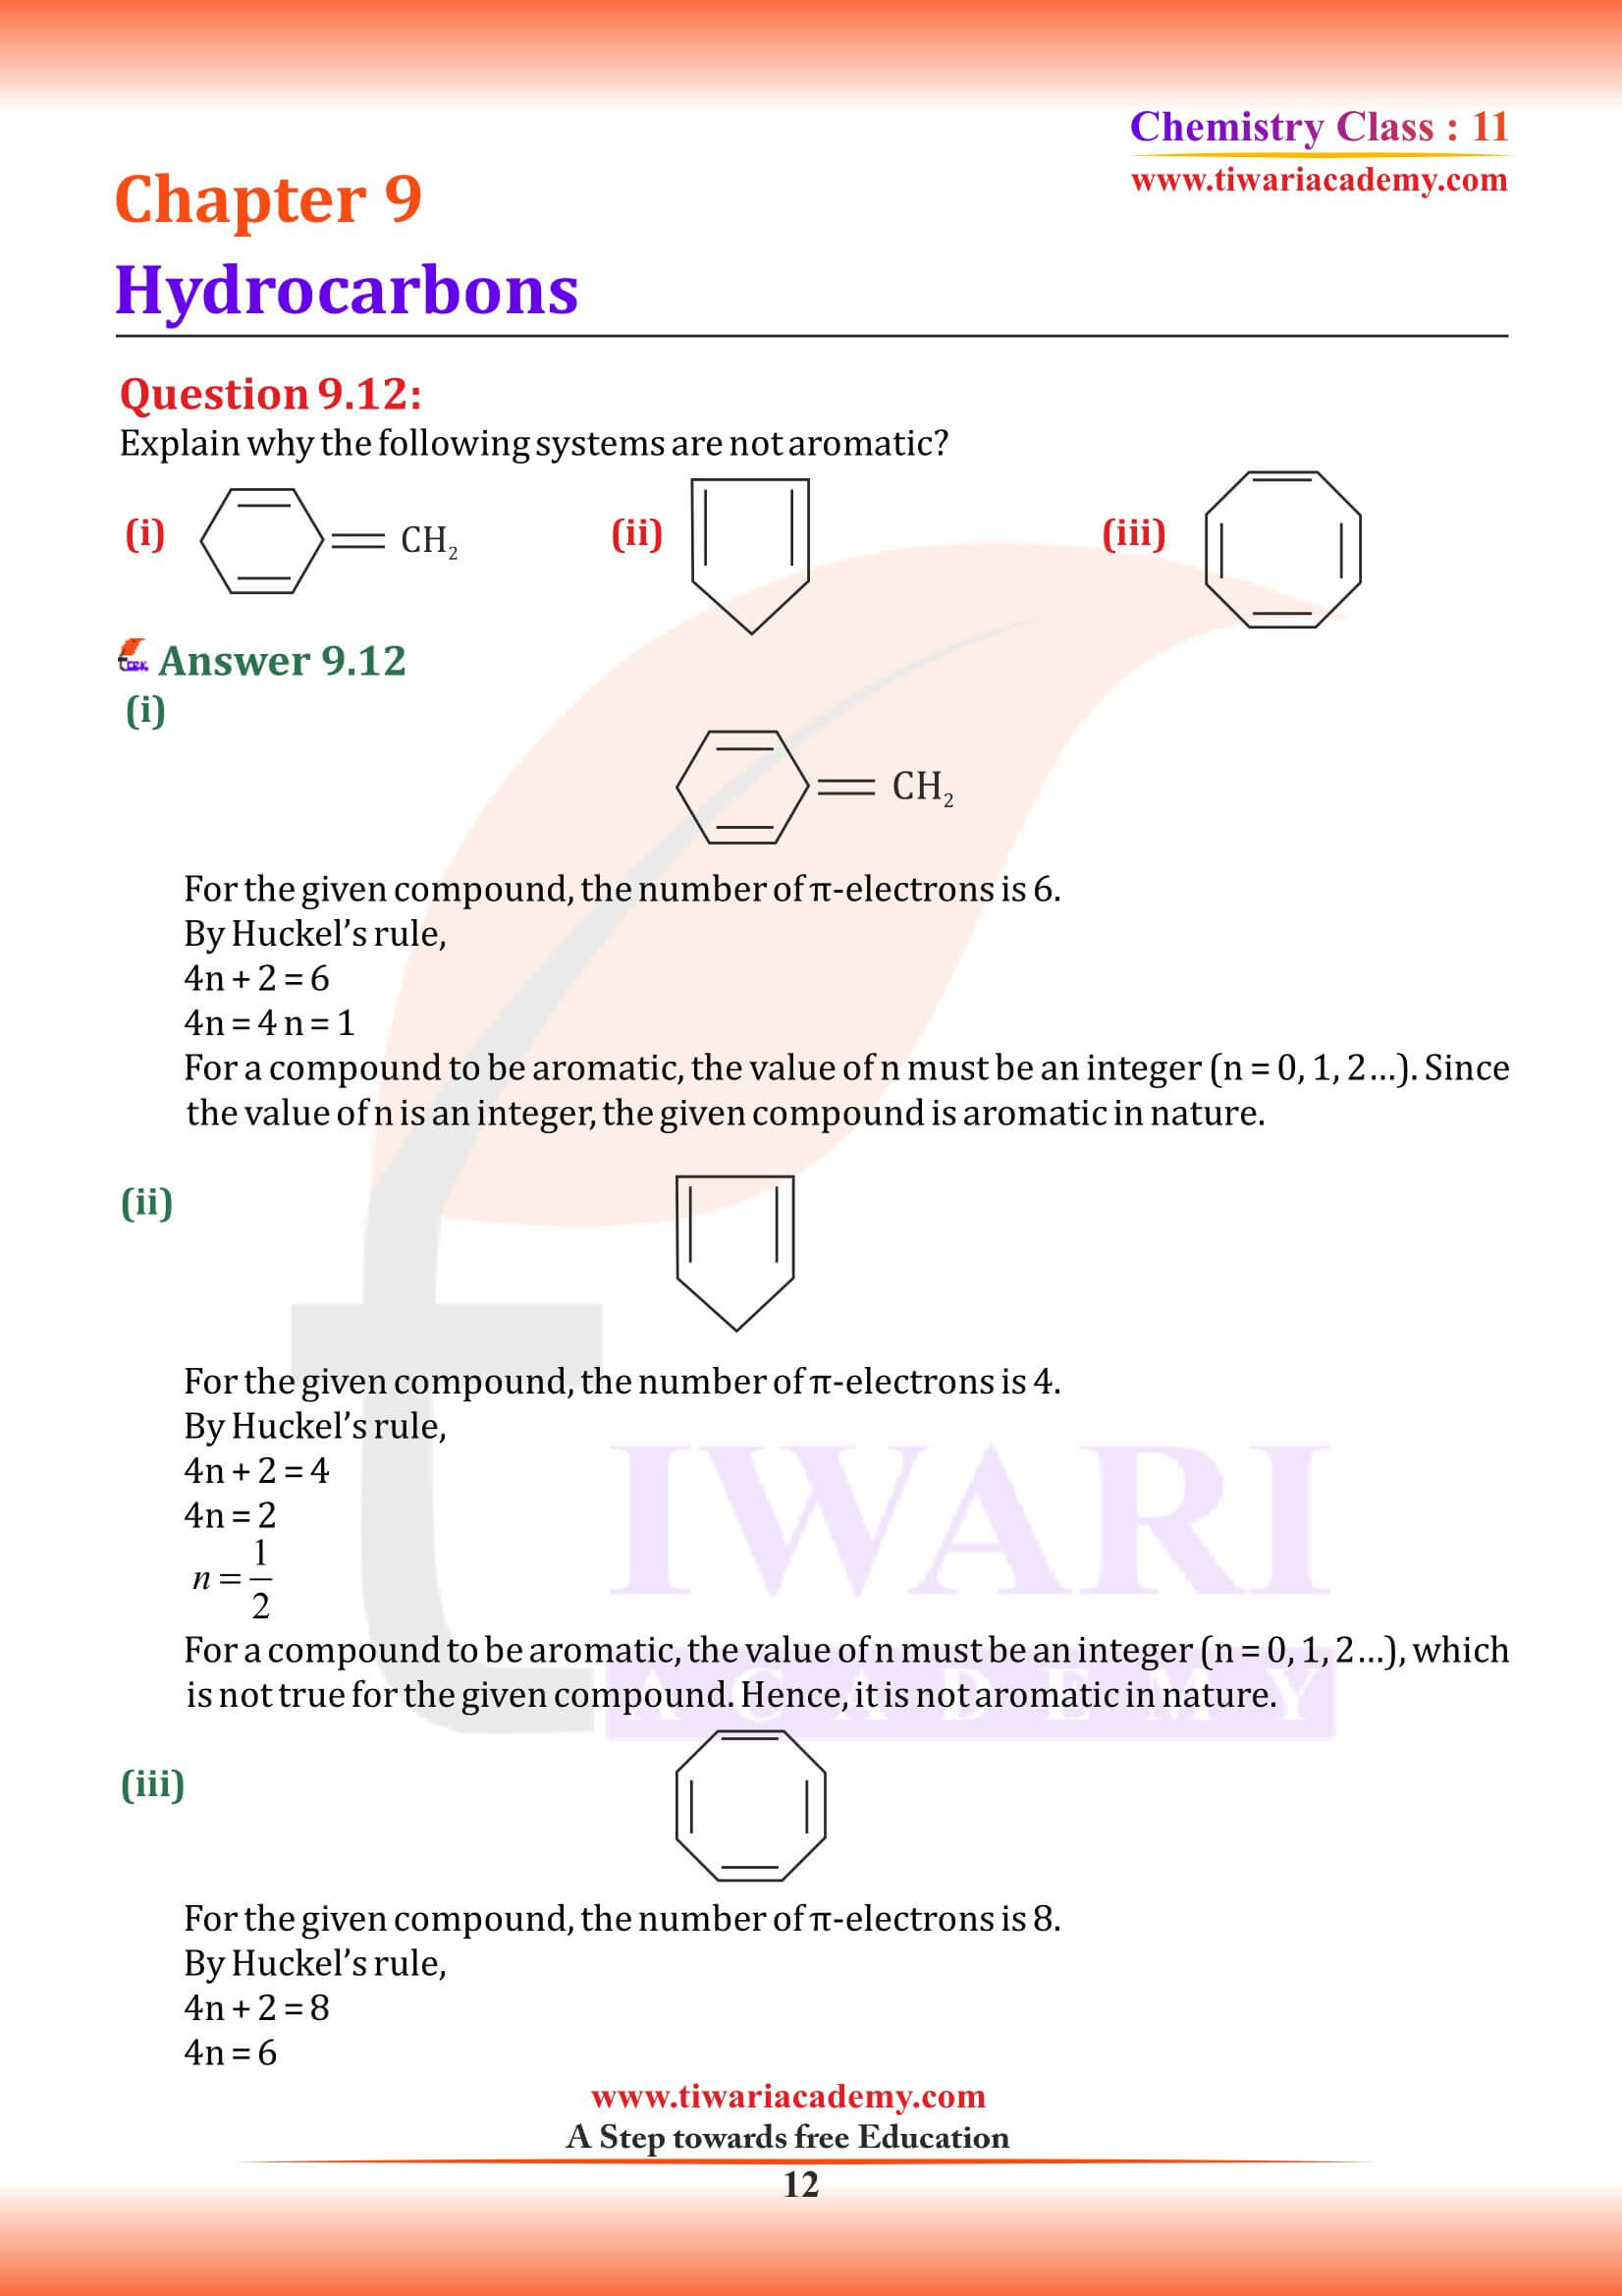 NCERT Class 11 Chemistry Chapter 9 Download